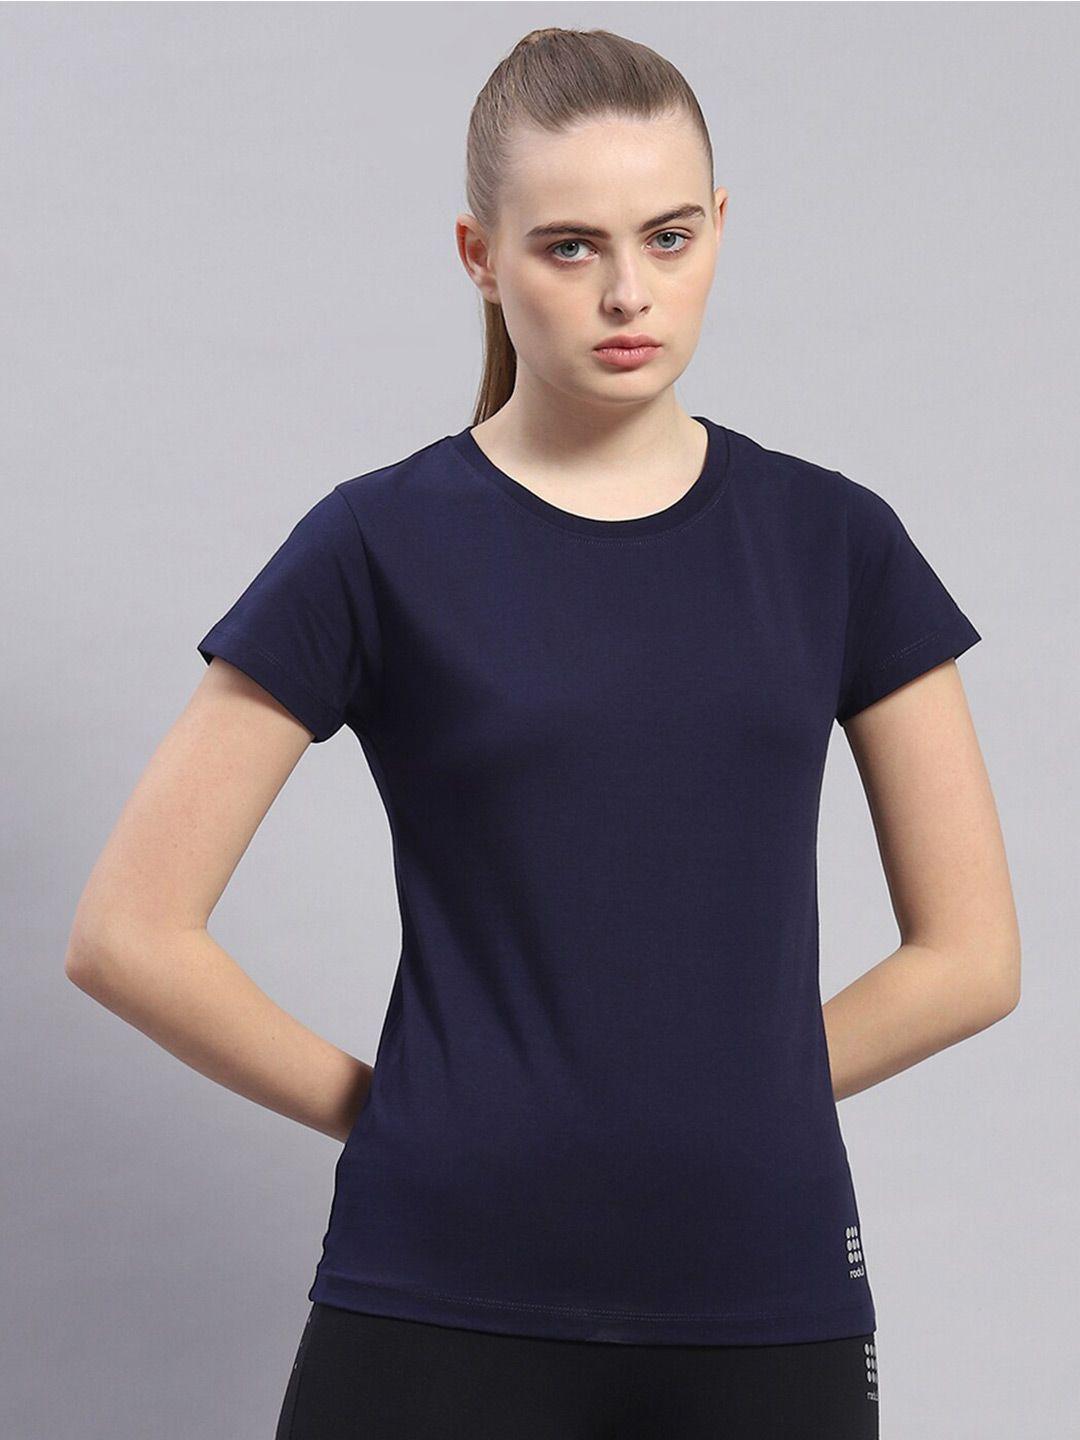 rock.it round neck short sleeves casual top